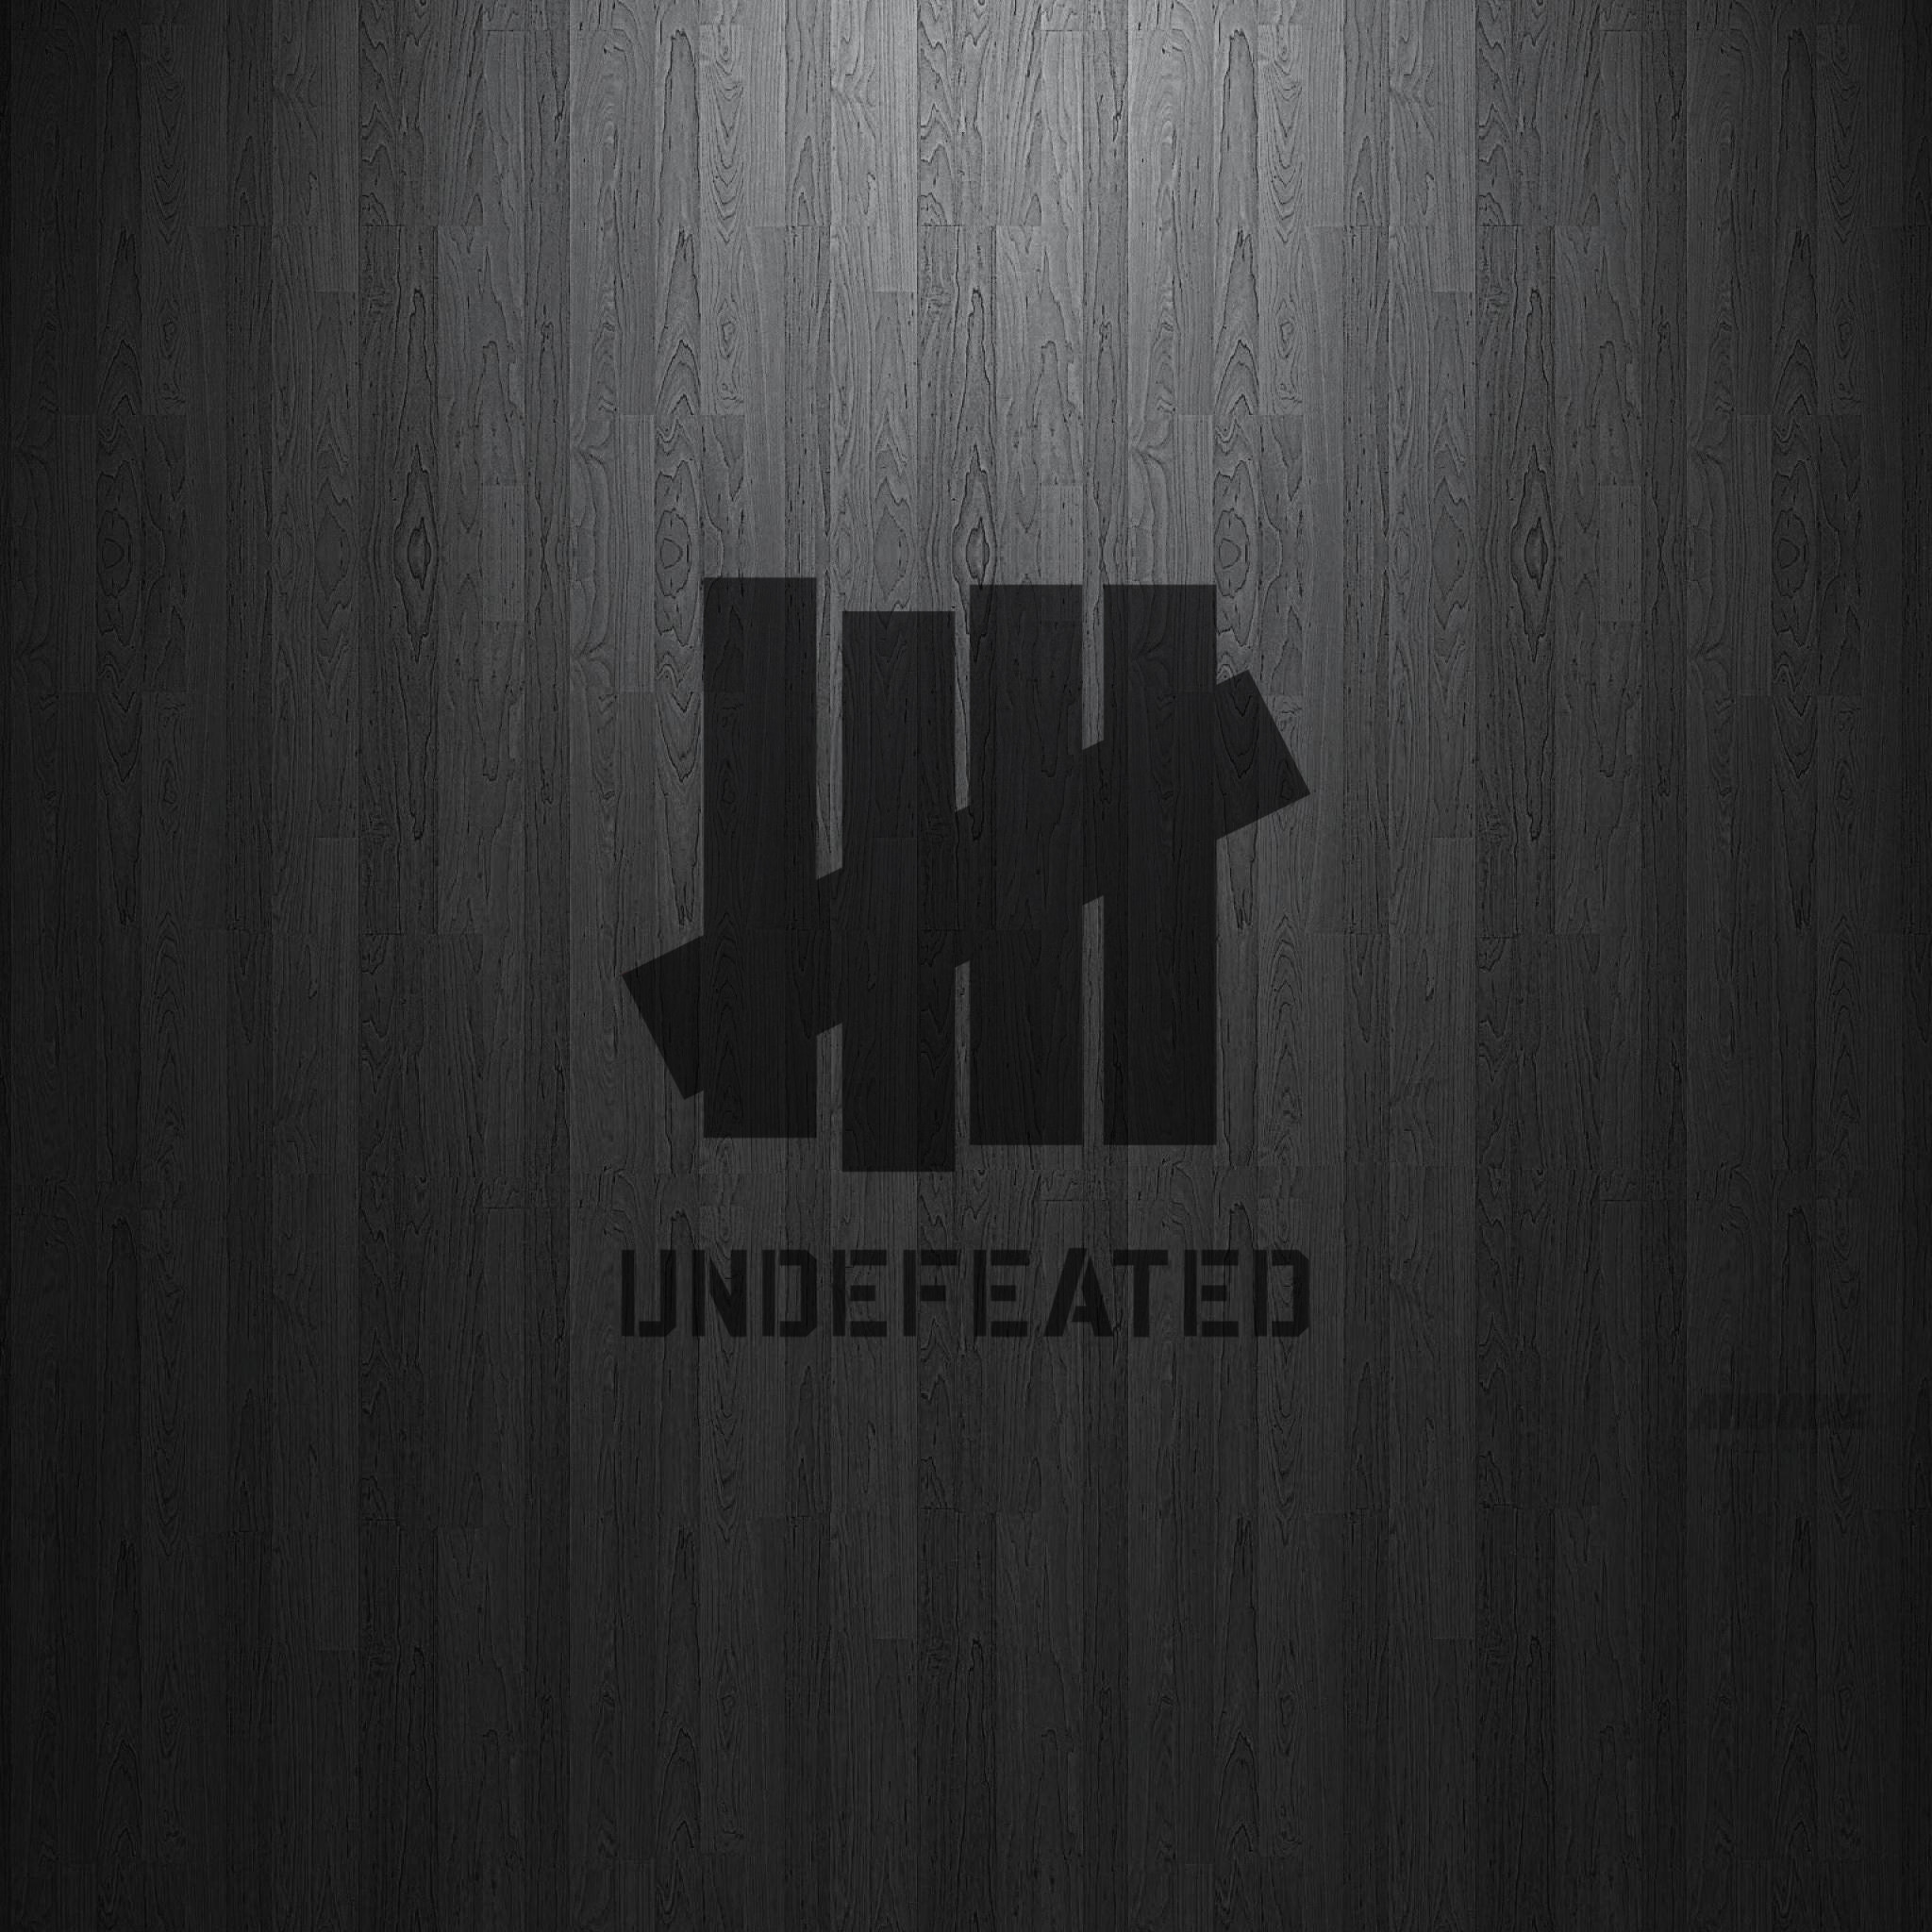 Undefeated iphone wallpaper - all the Gallery you need iPad